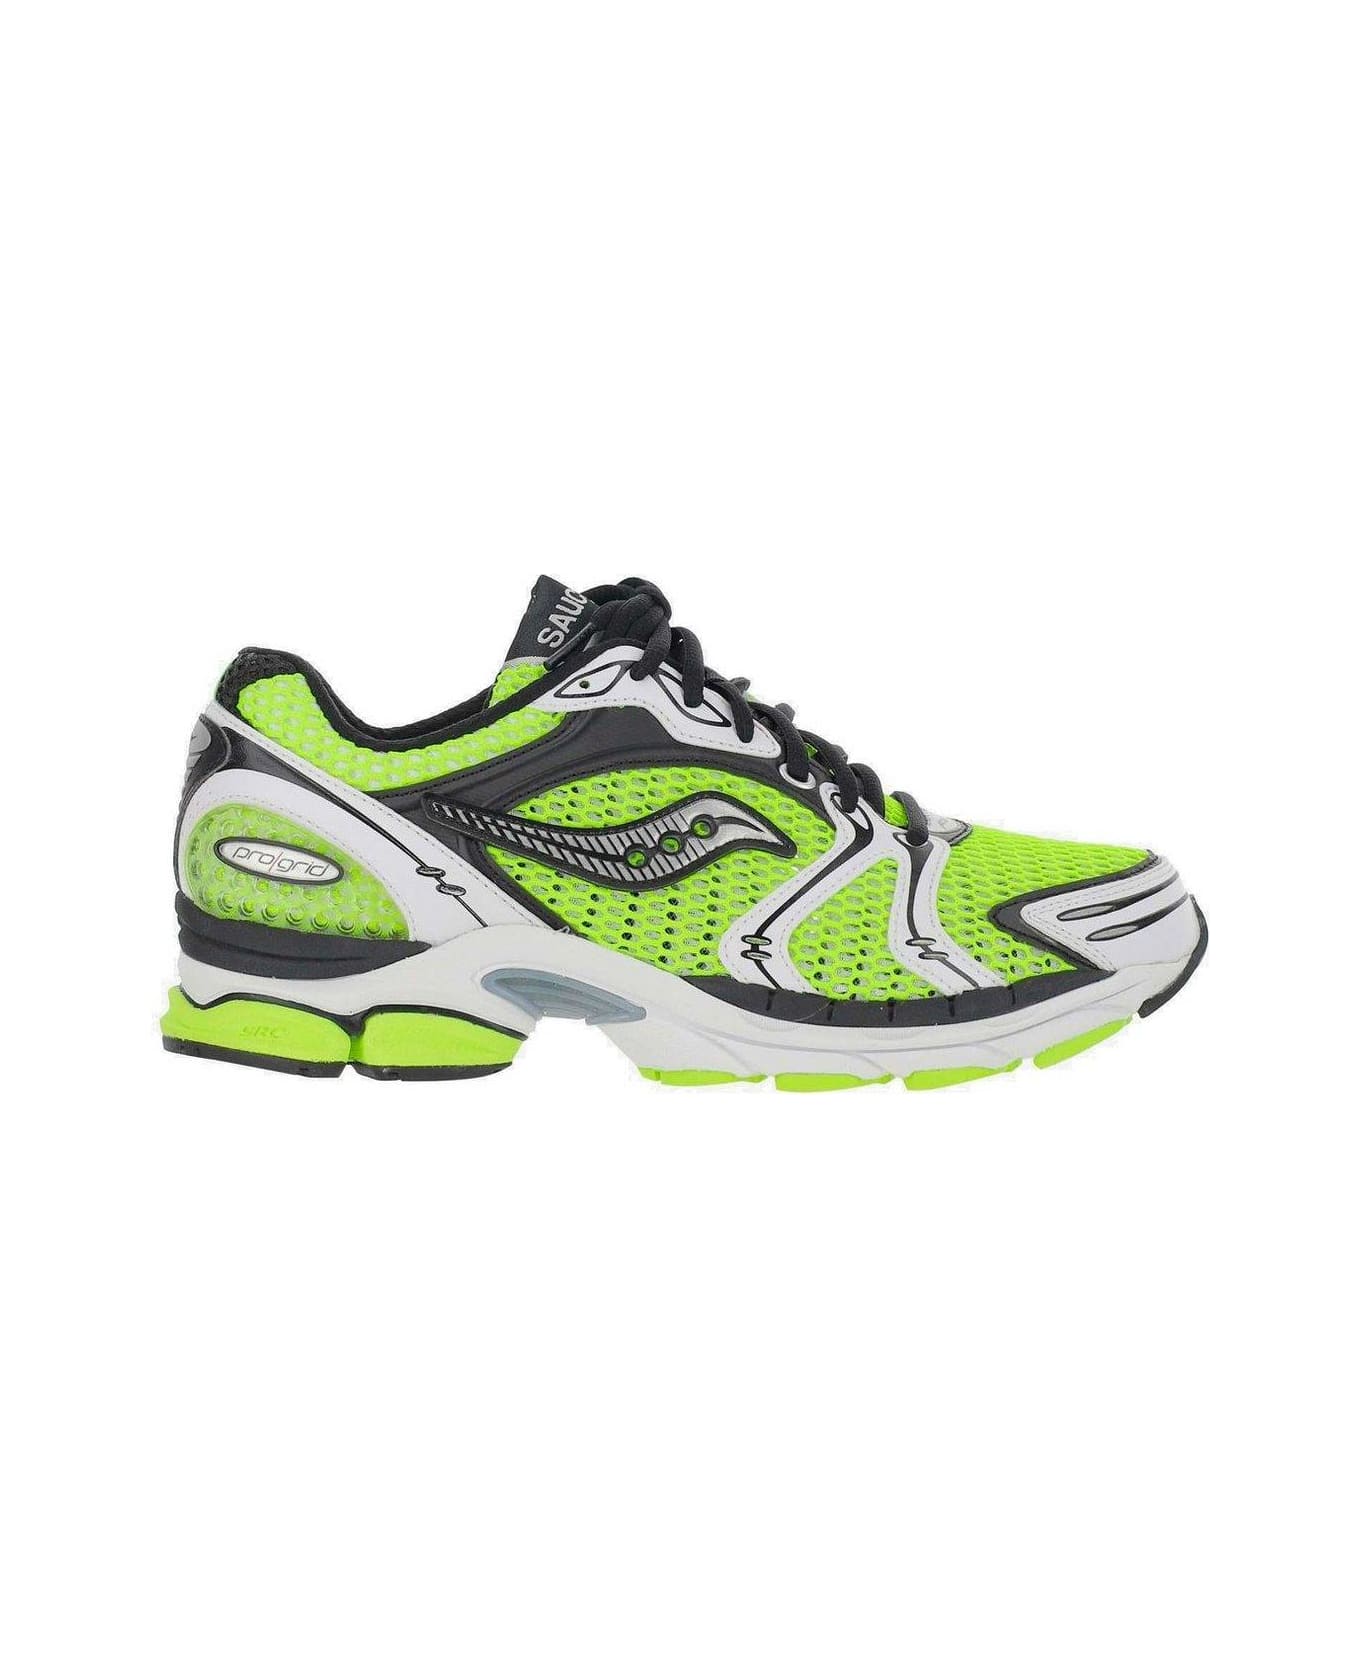 Saucony Progrid Triumph 4 Sneakers Sneakers - YELLOW